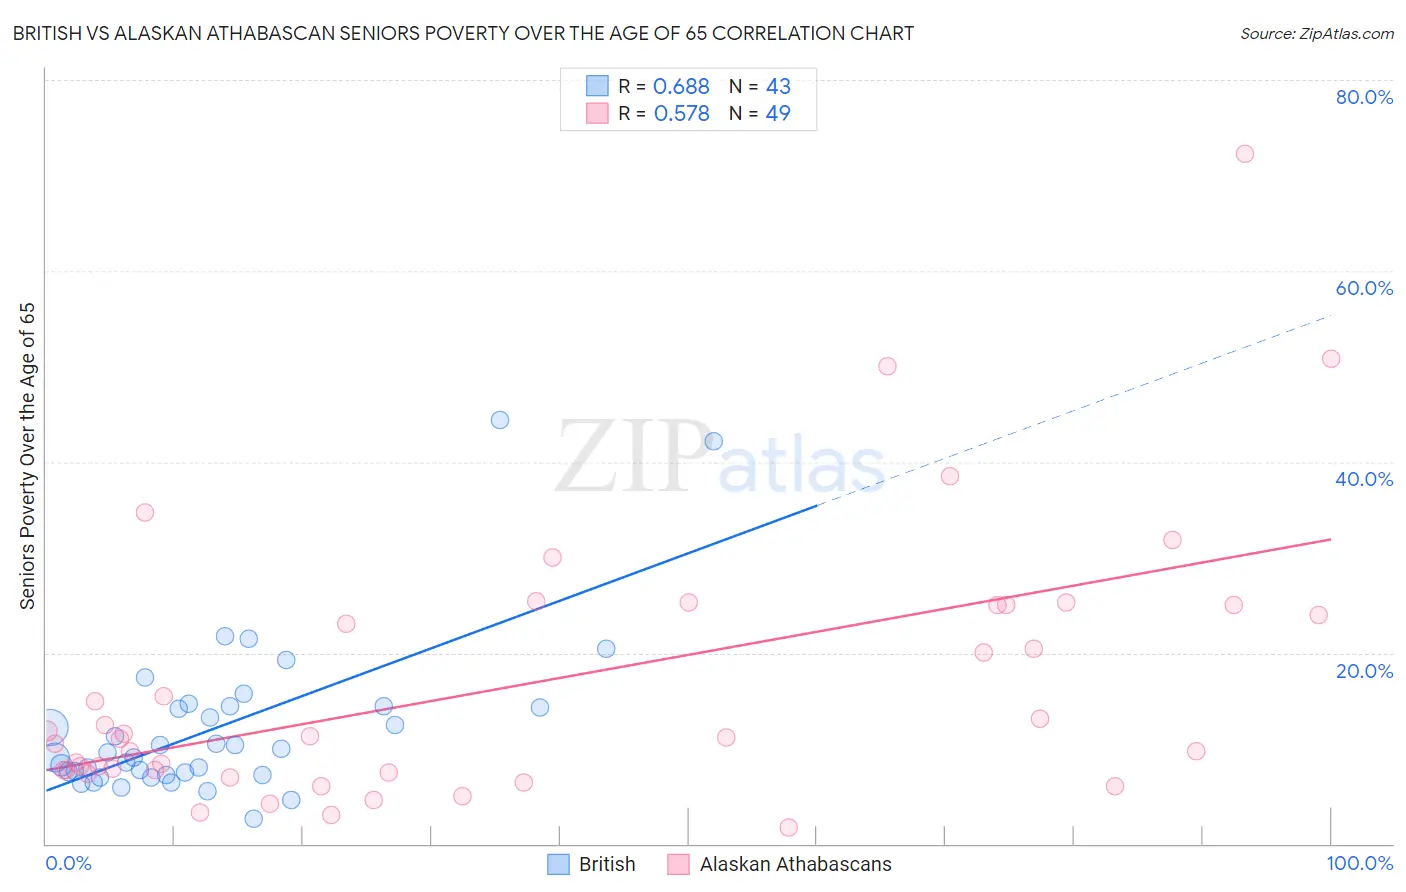 British vs Alaskan Athabascan Seniors Poverty Over the Age of 65